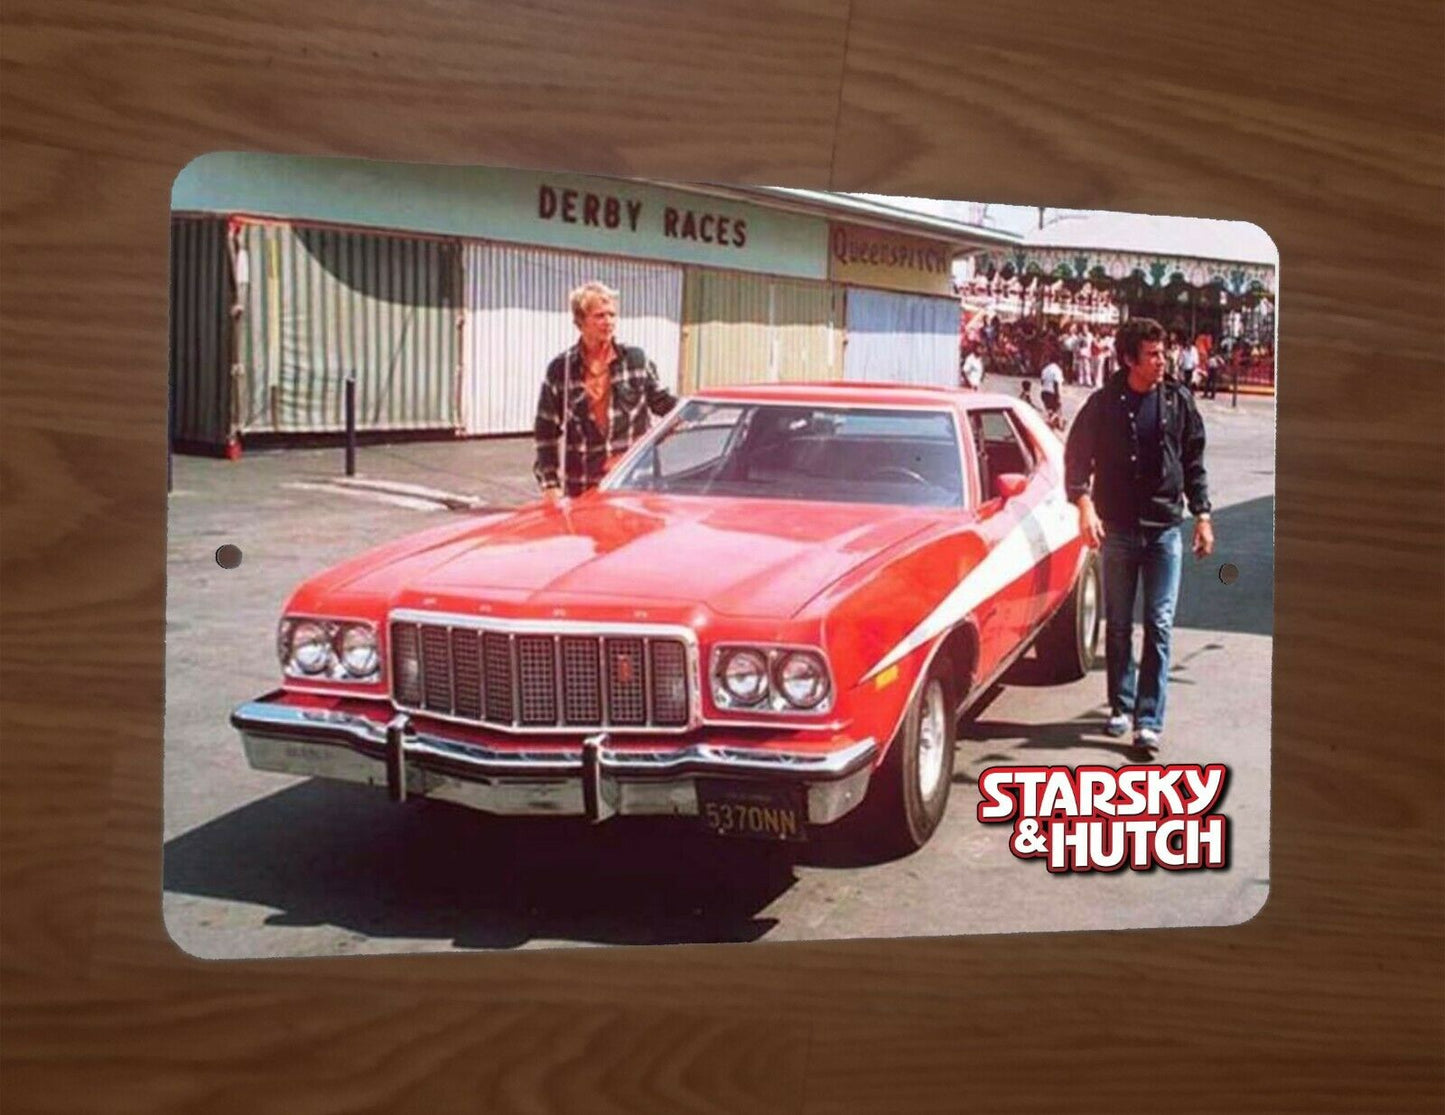 Starsky and Hutch 8x12 Metal Wall Sign